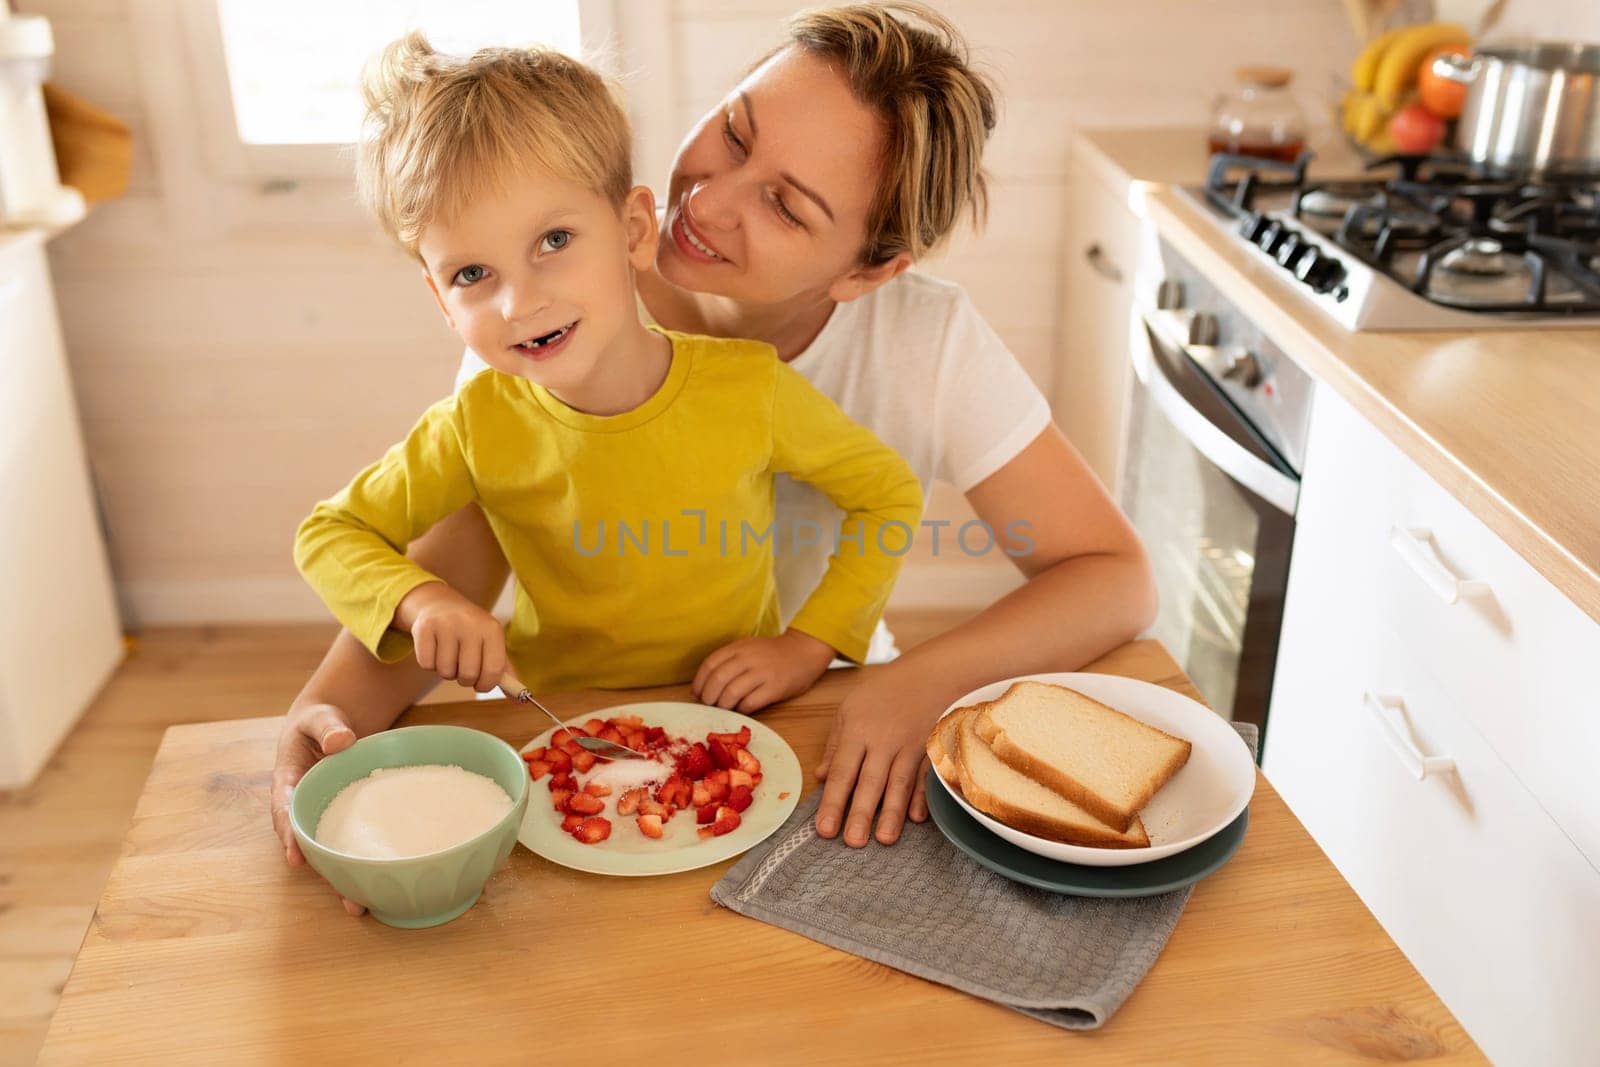 lifestyle concept, young mother and son spending time together at breakfast.